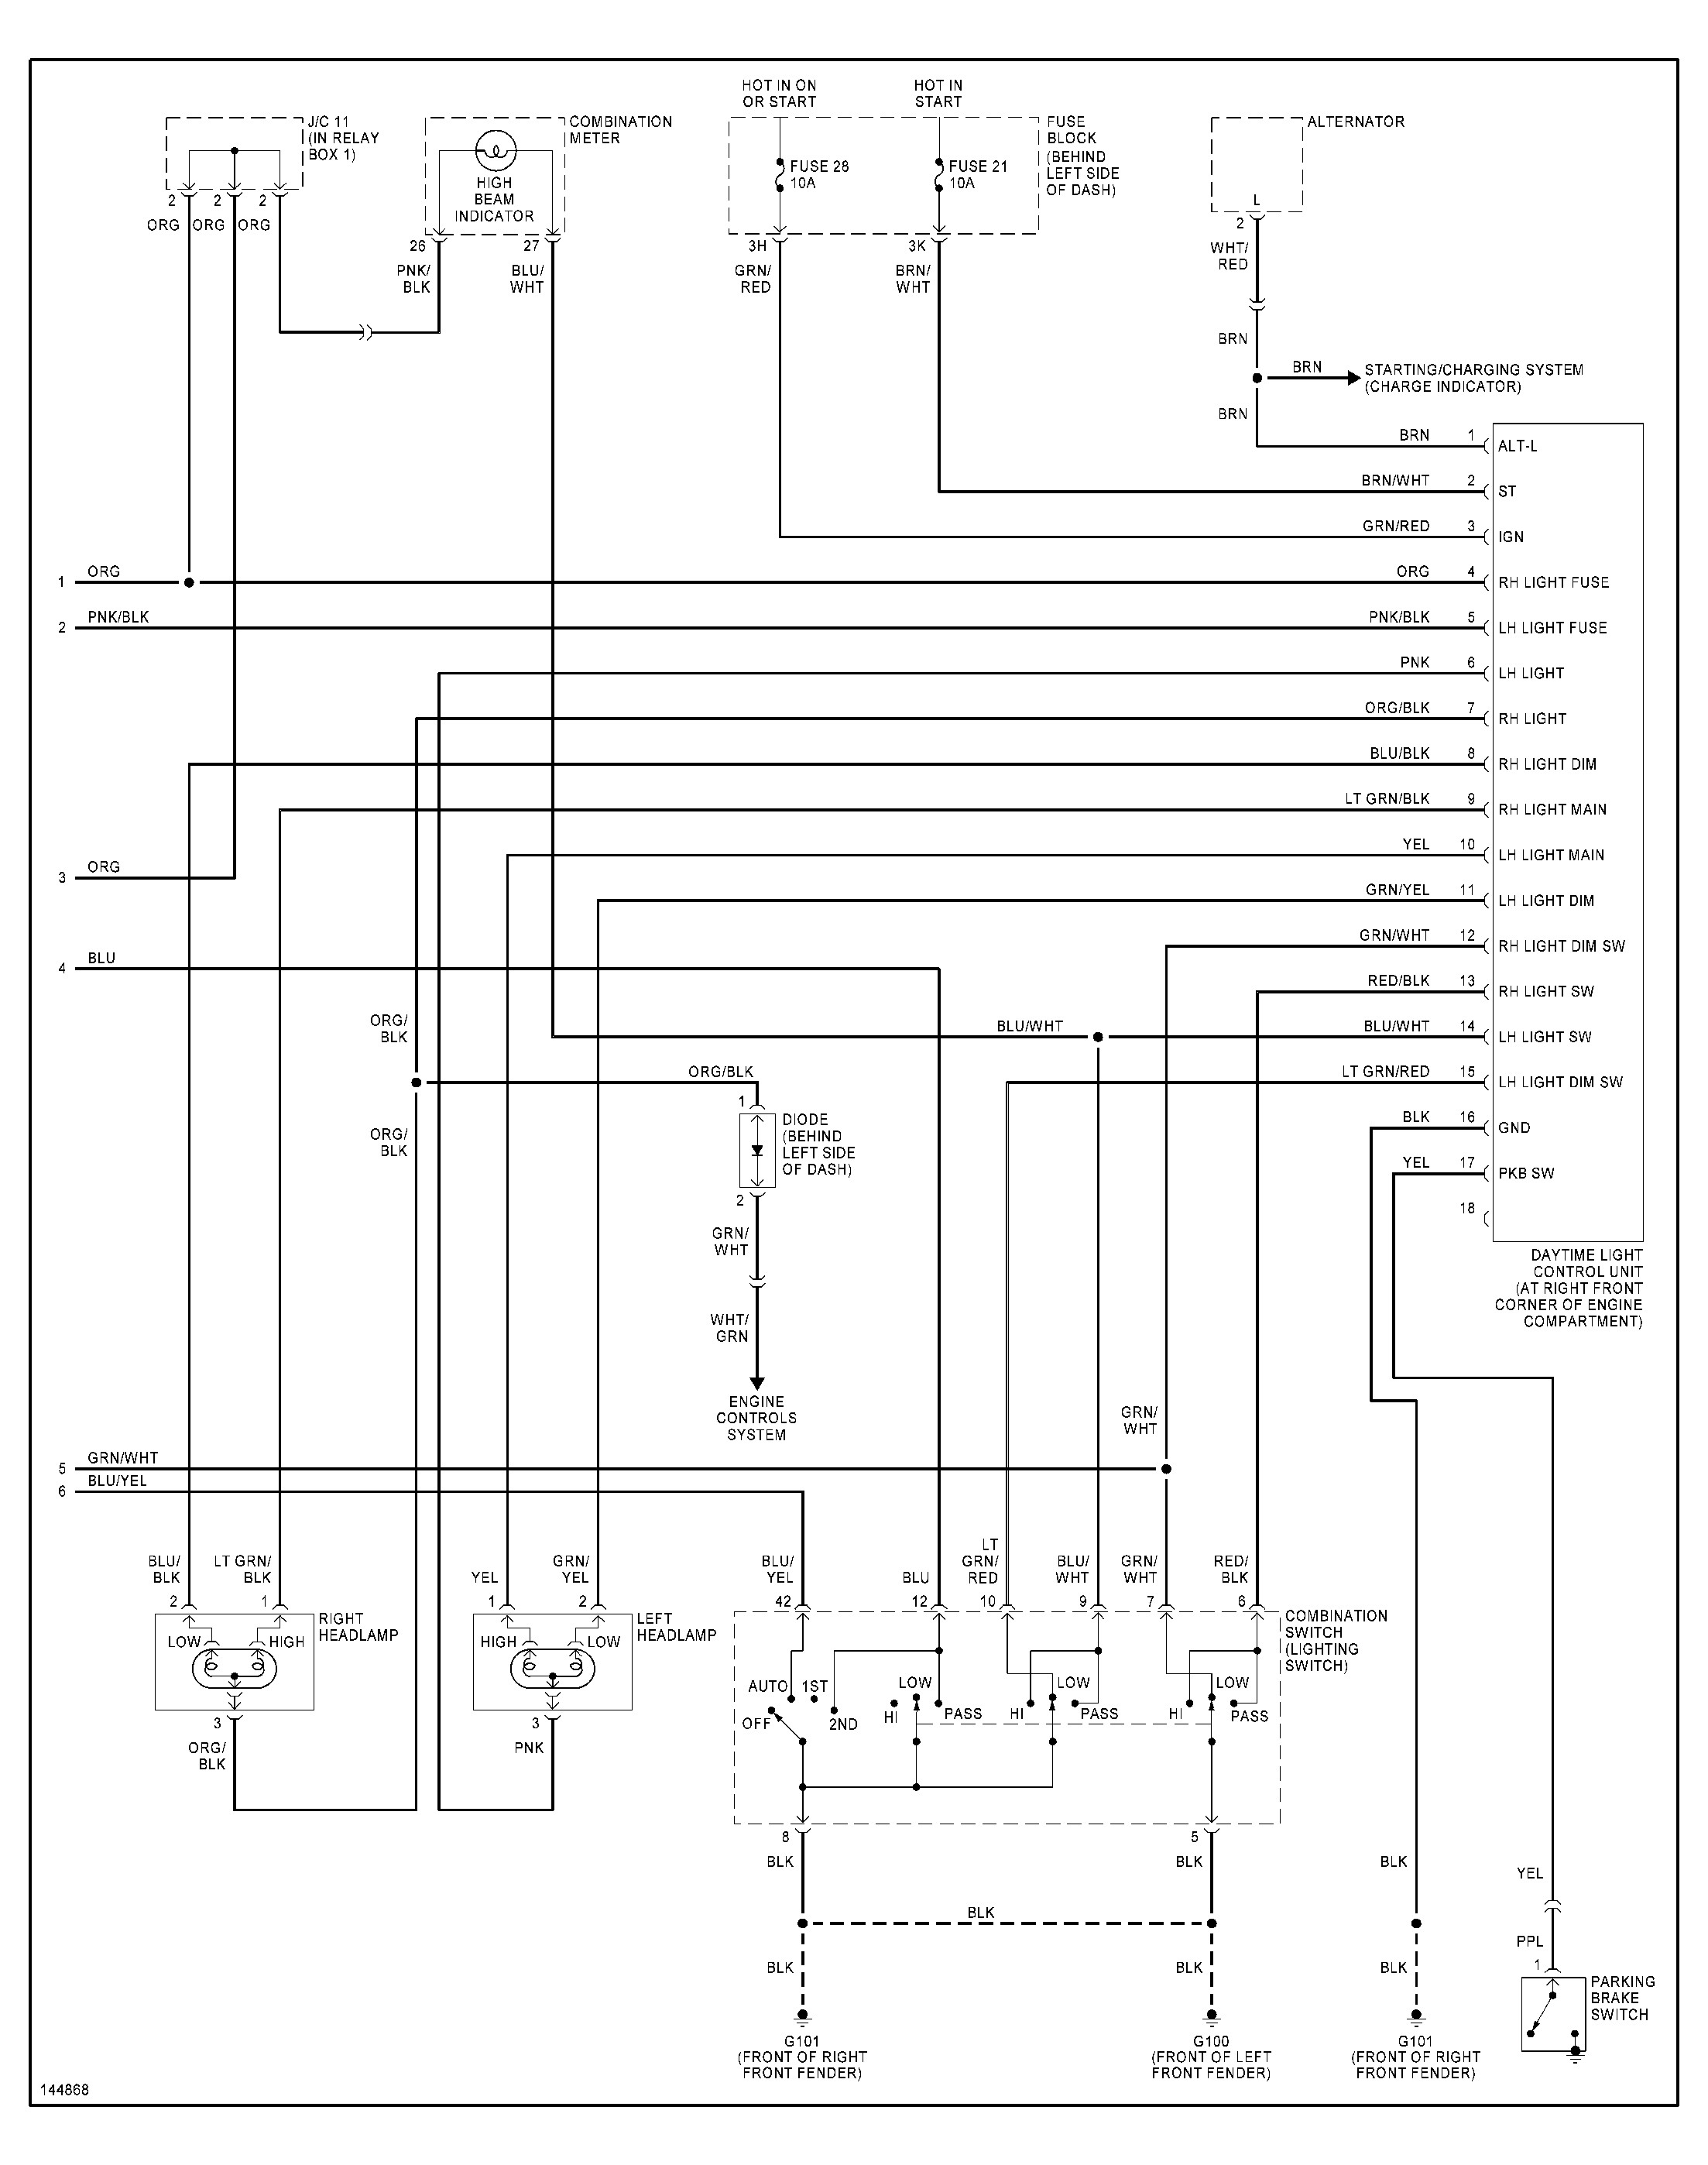 1997 Nissan Maxima Engine Diagram Nissan Maxima Radio Diagram Another Blog About Wiring Diagram • Of 1997 Nissan Maxima Engine Diagram